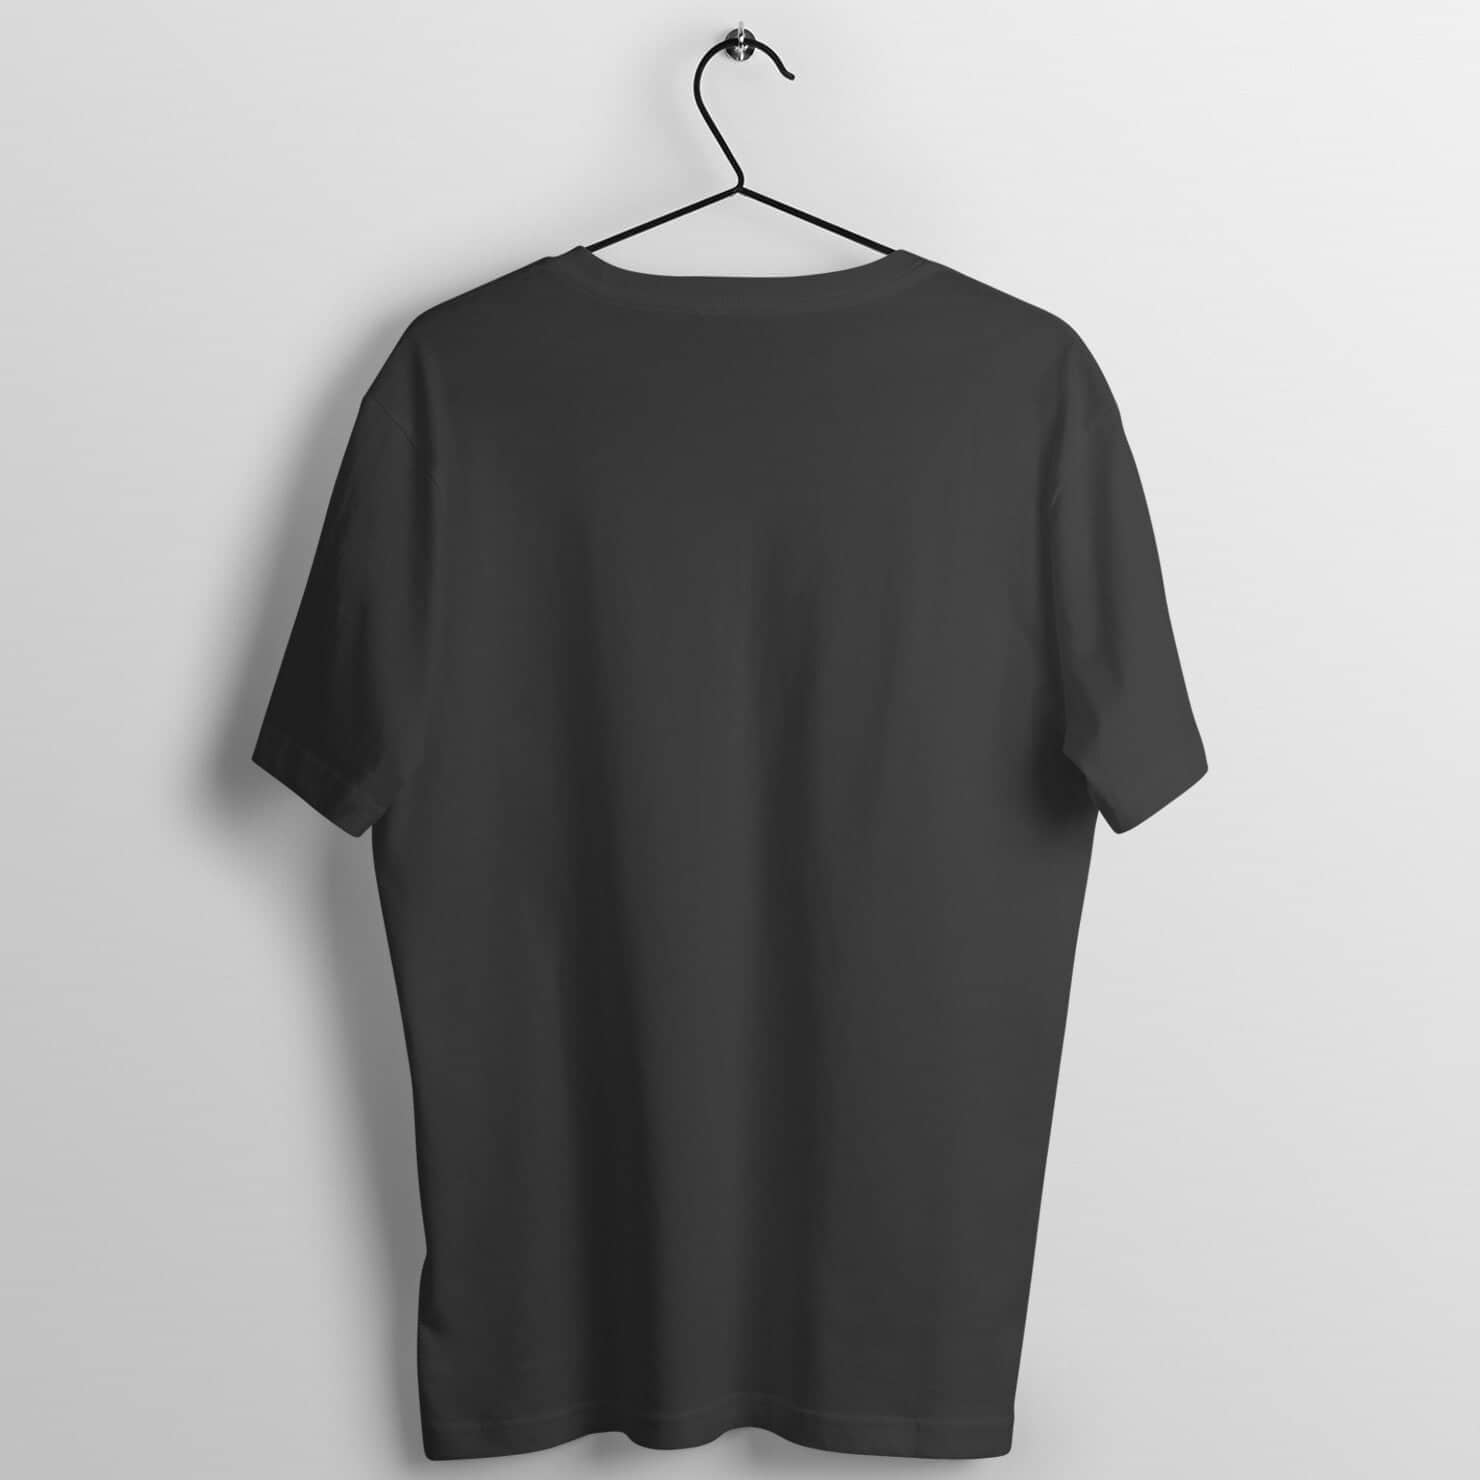 All About Speed Exclusive Black T Shirt for Men and Women Shirts & Tops Printrove 